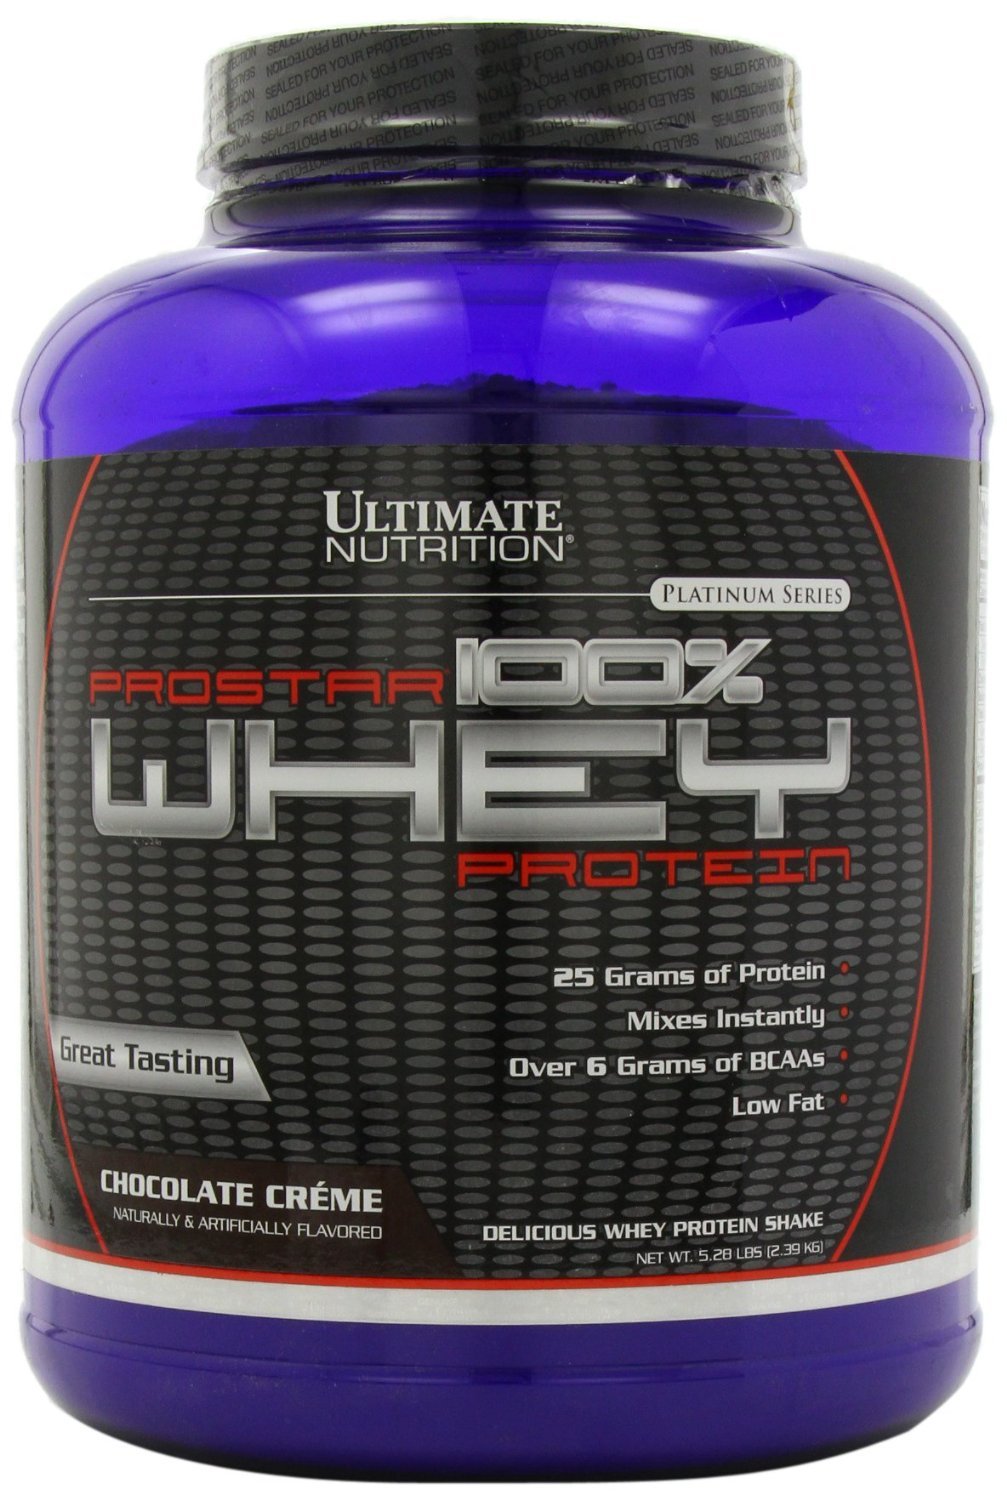 Prostar Whey, 2390 g, Ultimate Nutrition. Whey Isolate. Lean muscle mass Weight Loss recovery Anti-catabolic properties 